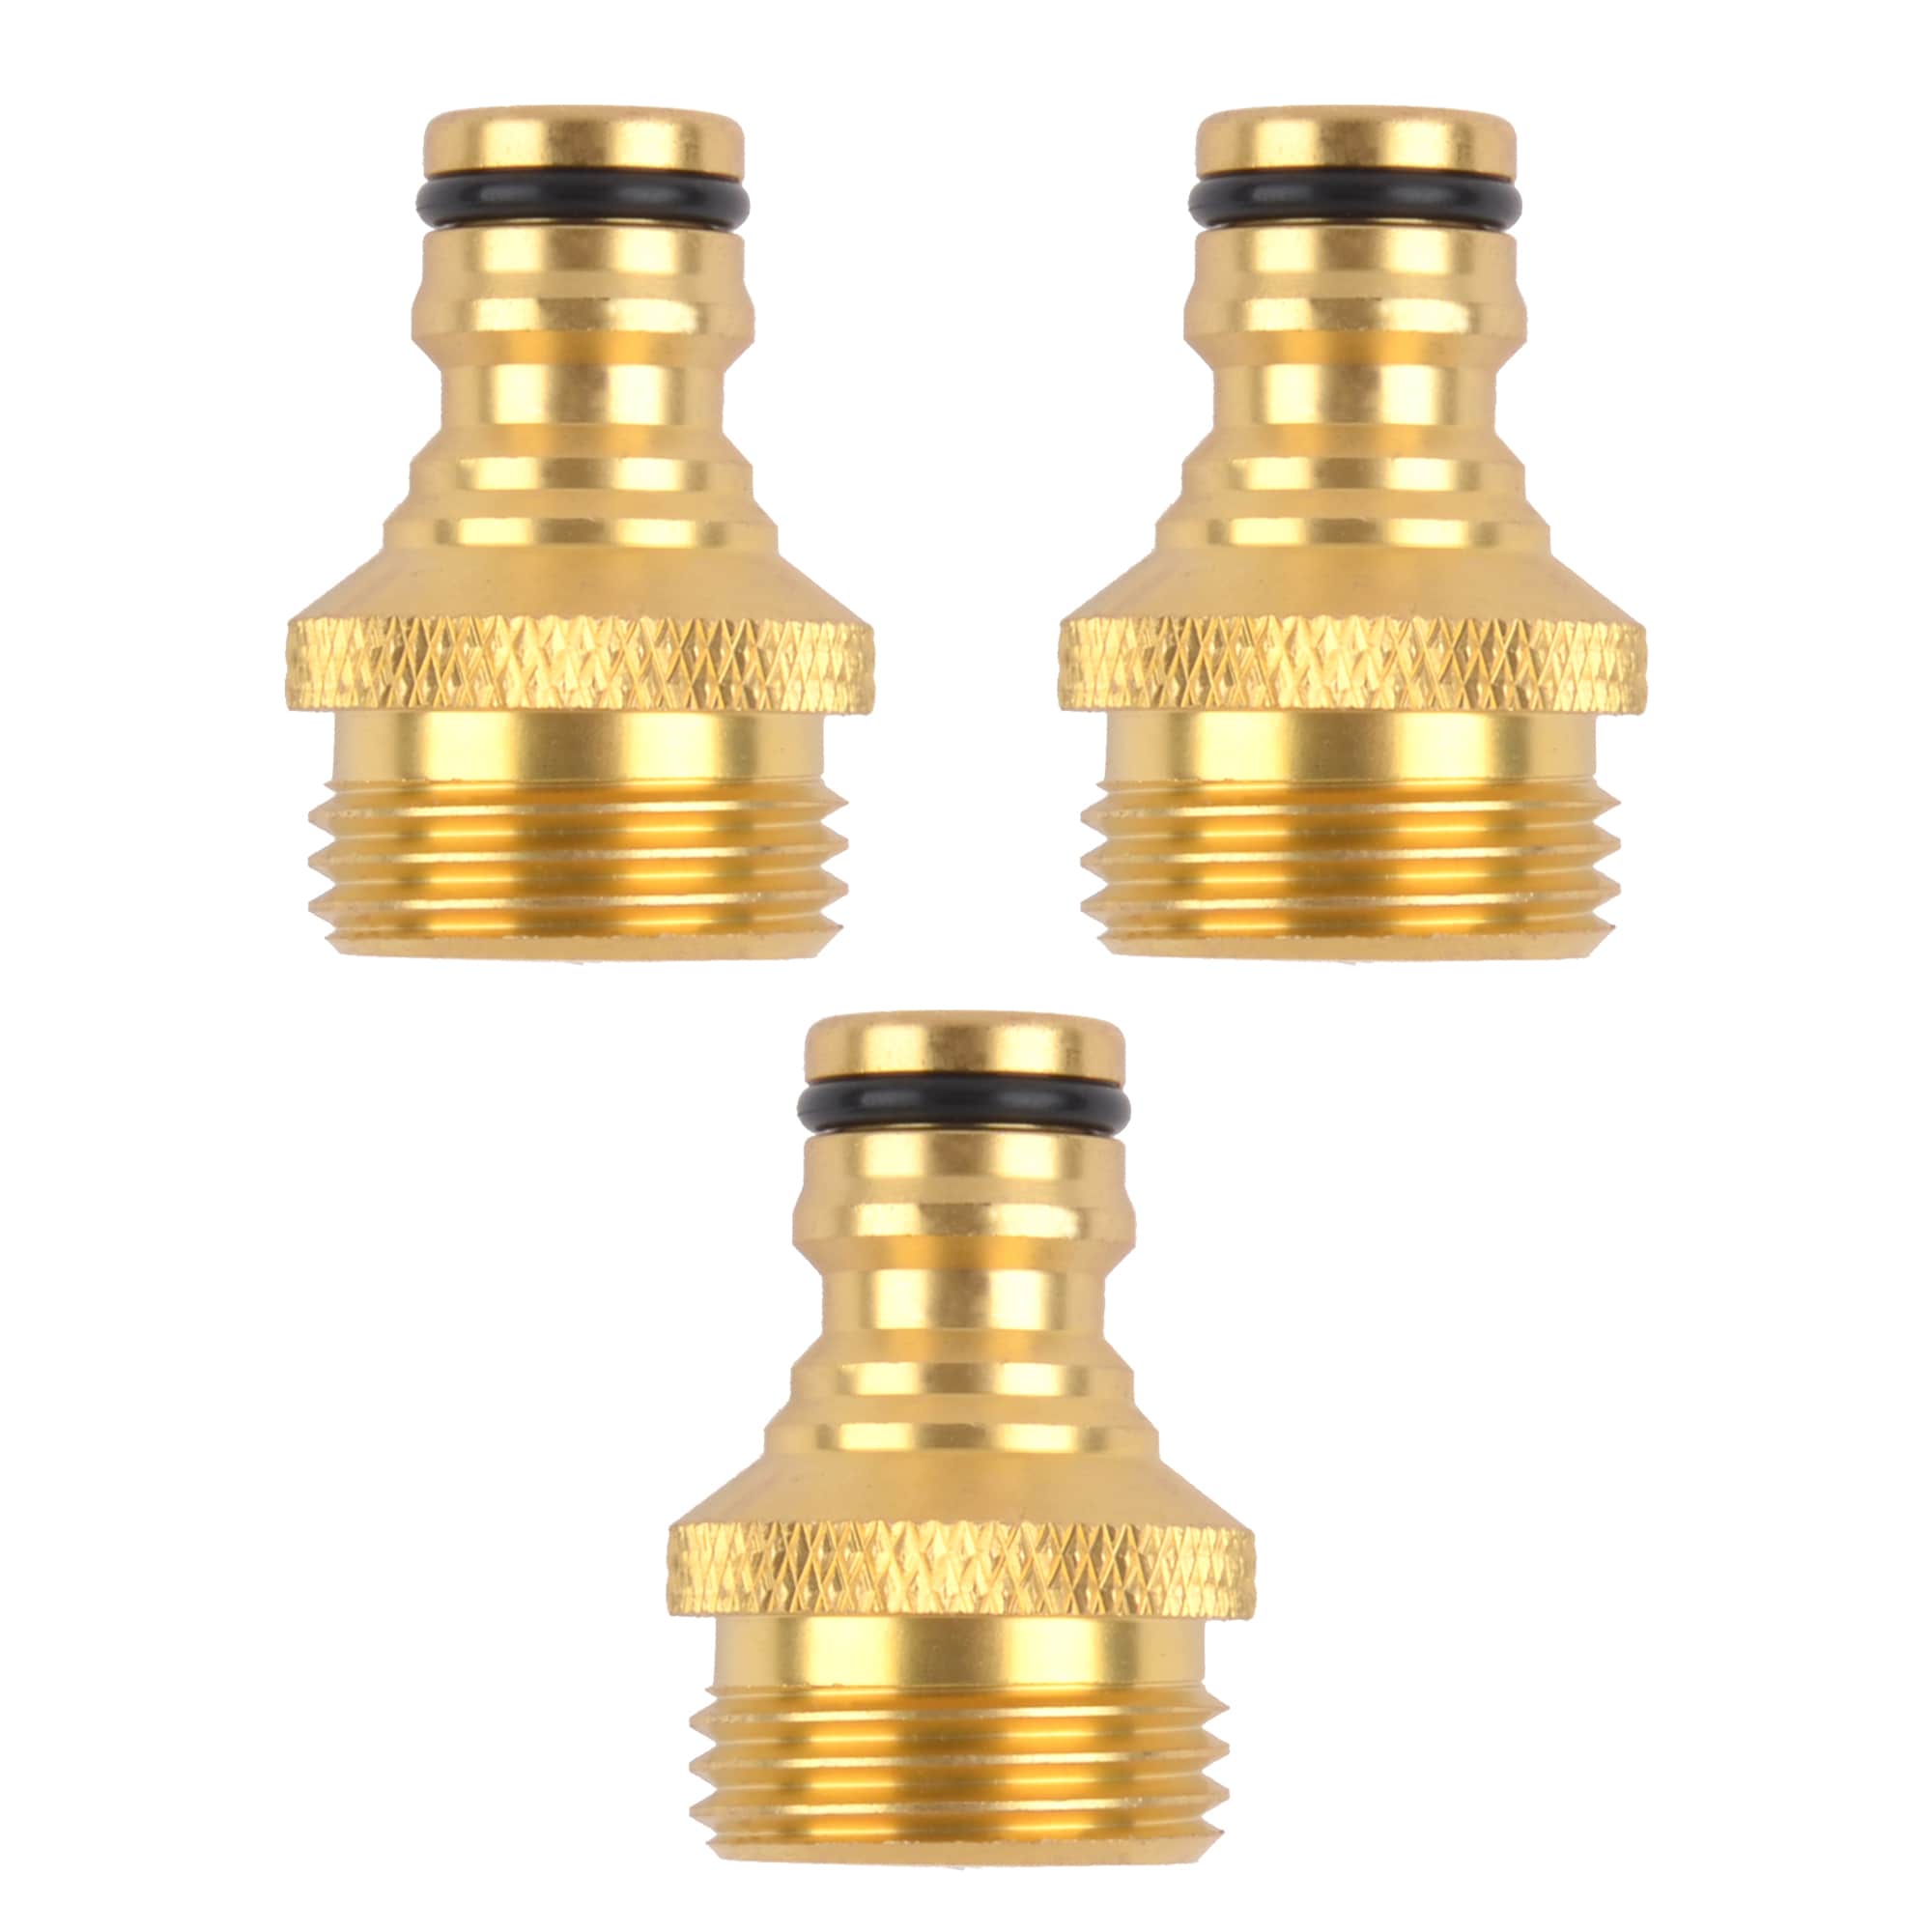 Hose Connector Set Of Garden Hose Fittings. Nozzle, Quick Connector,  Waterproof Connector, Double Male Connectors, Tap Connectors Size 1/2 And  3/4 Inc